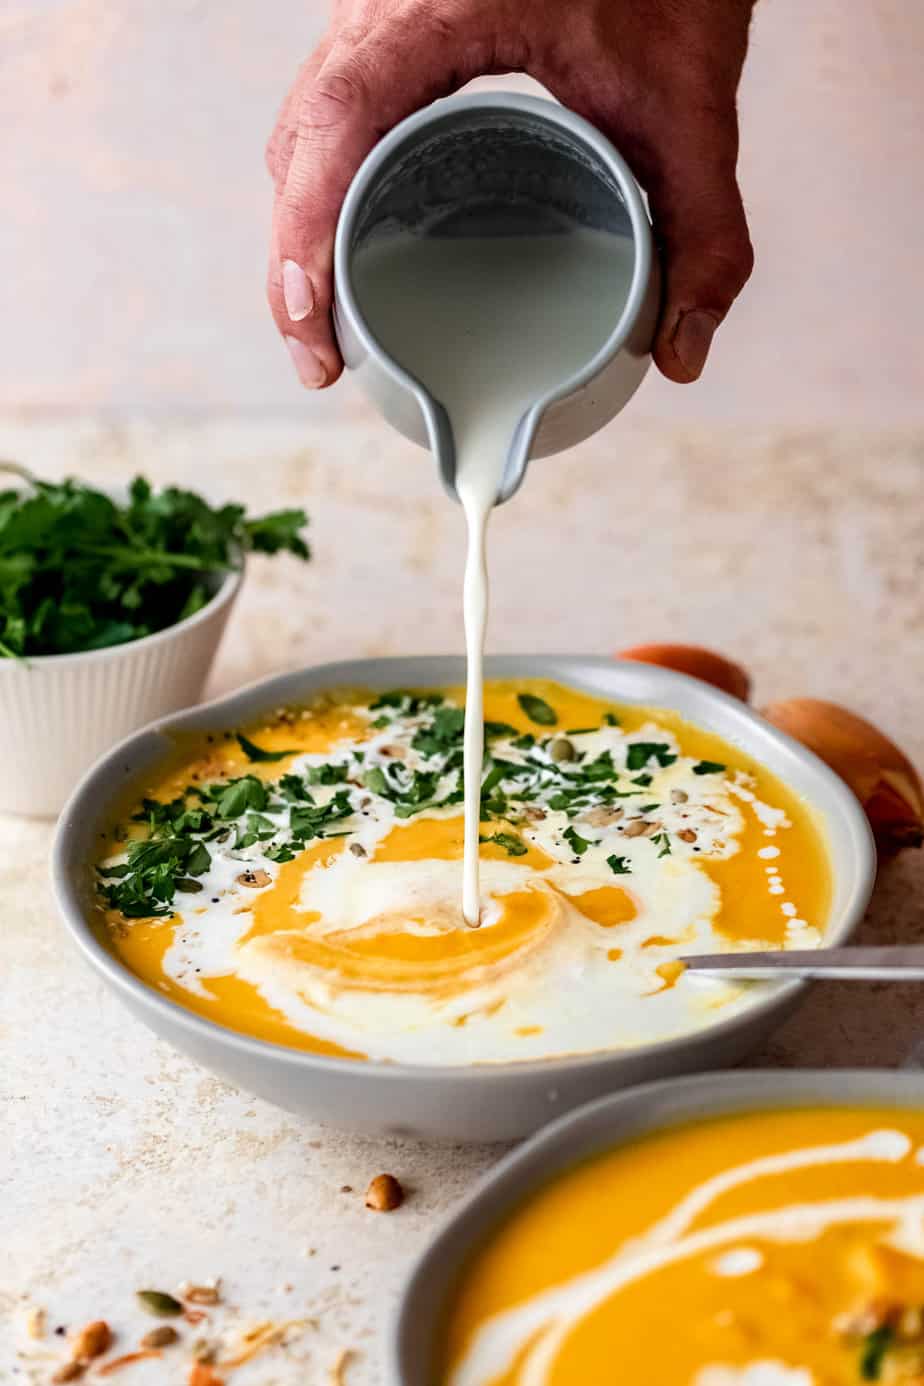 A jug pouring cream over a bowl of pumpkin soup and fresh herbs.